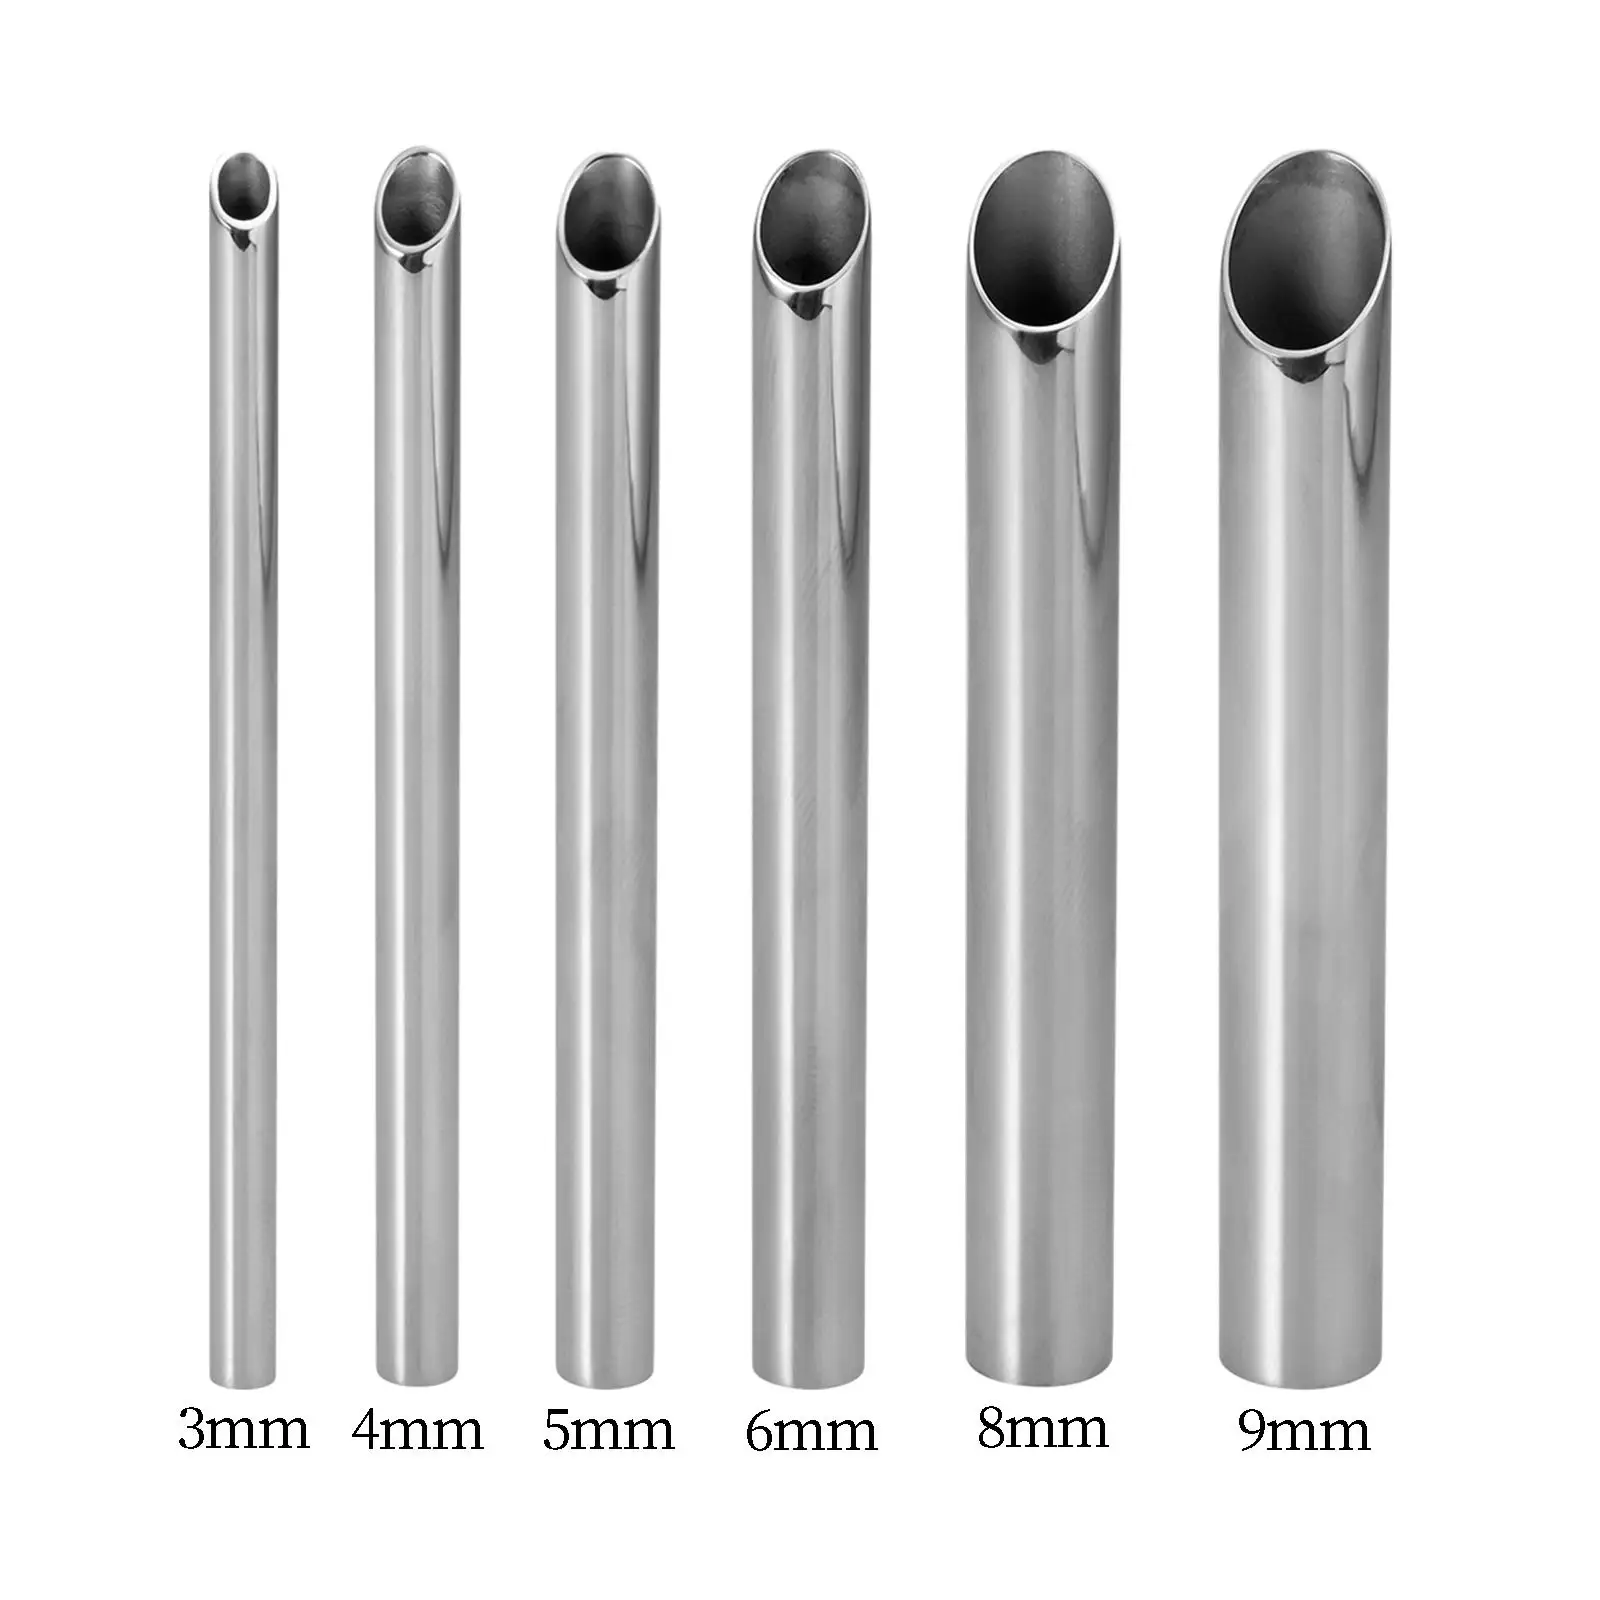 Steel Piercing Receiver Tube Auxiliary Professional Tool Body Jewelry Holding Piercing Tool for Nose Ear Belly Lip